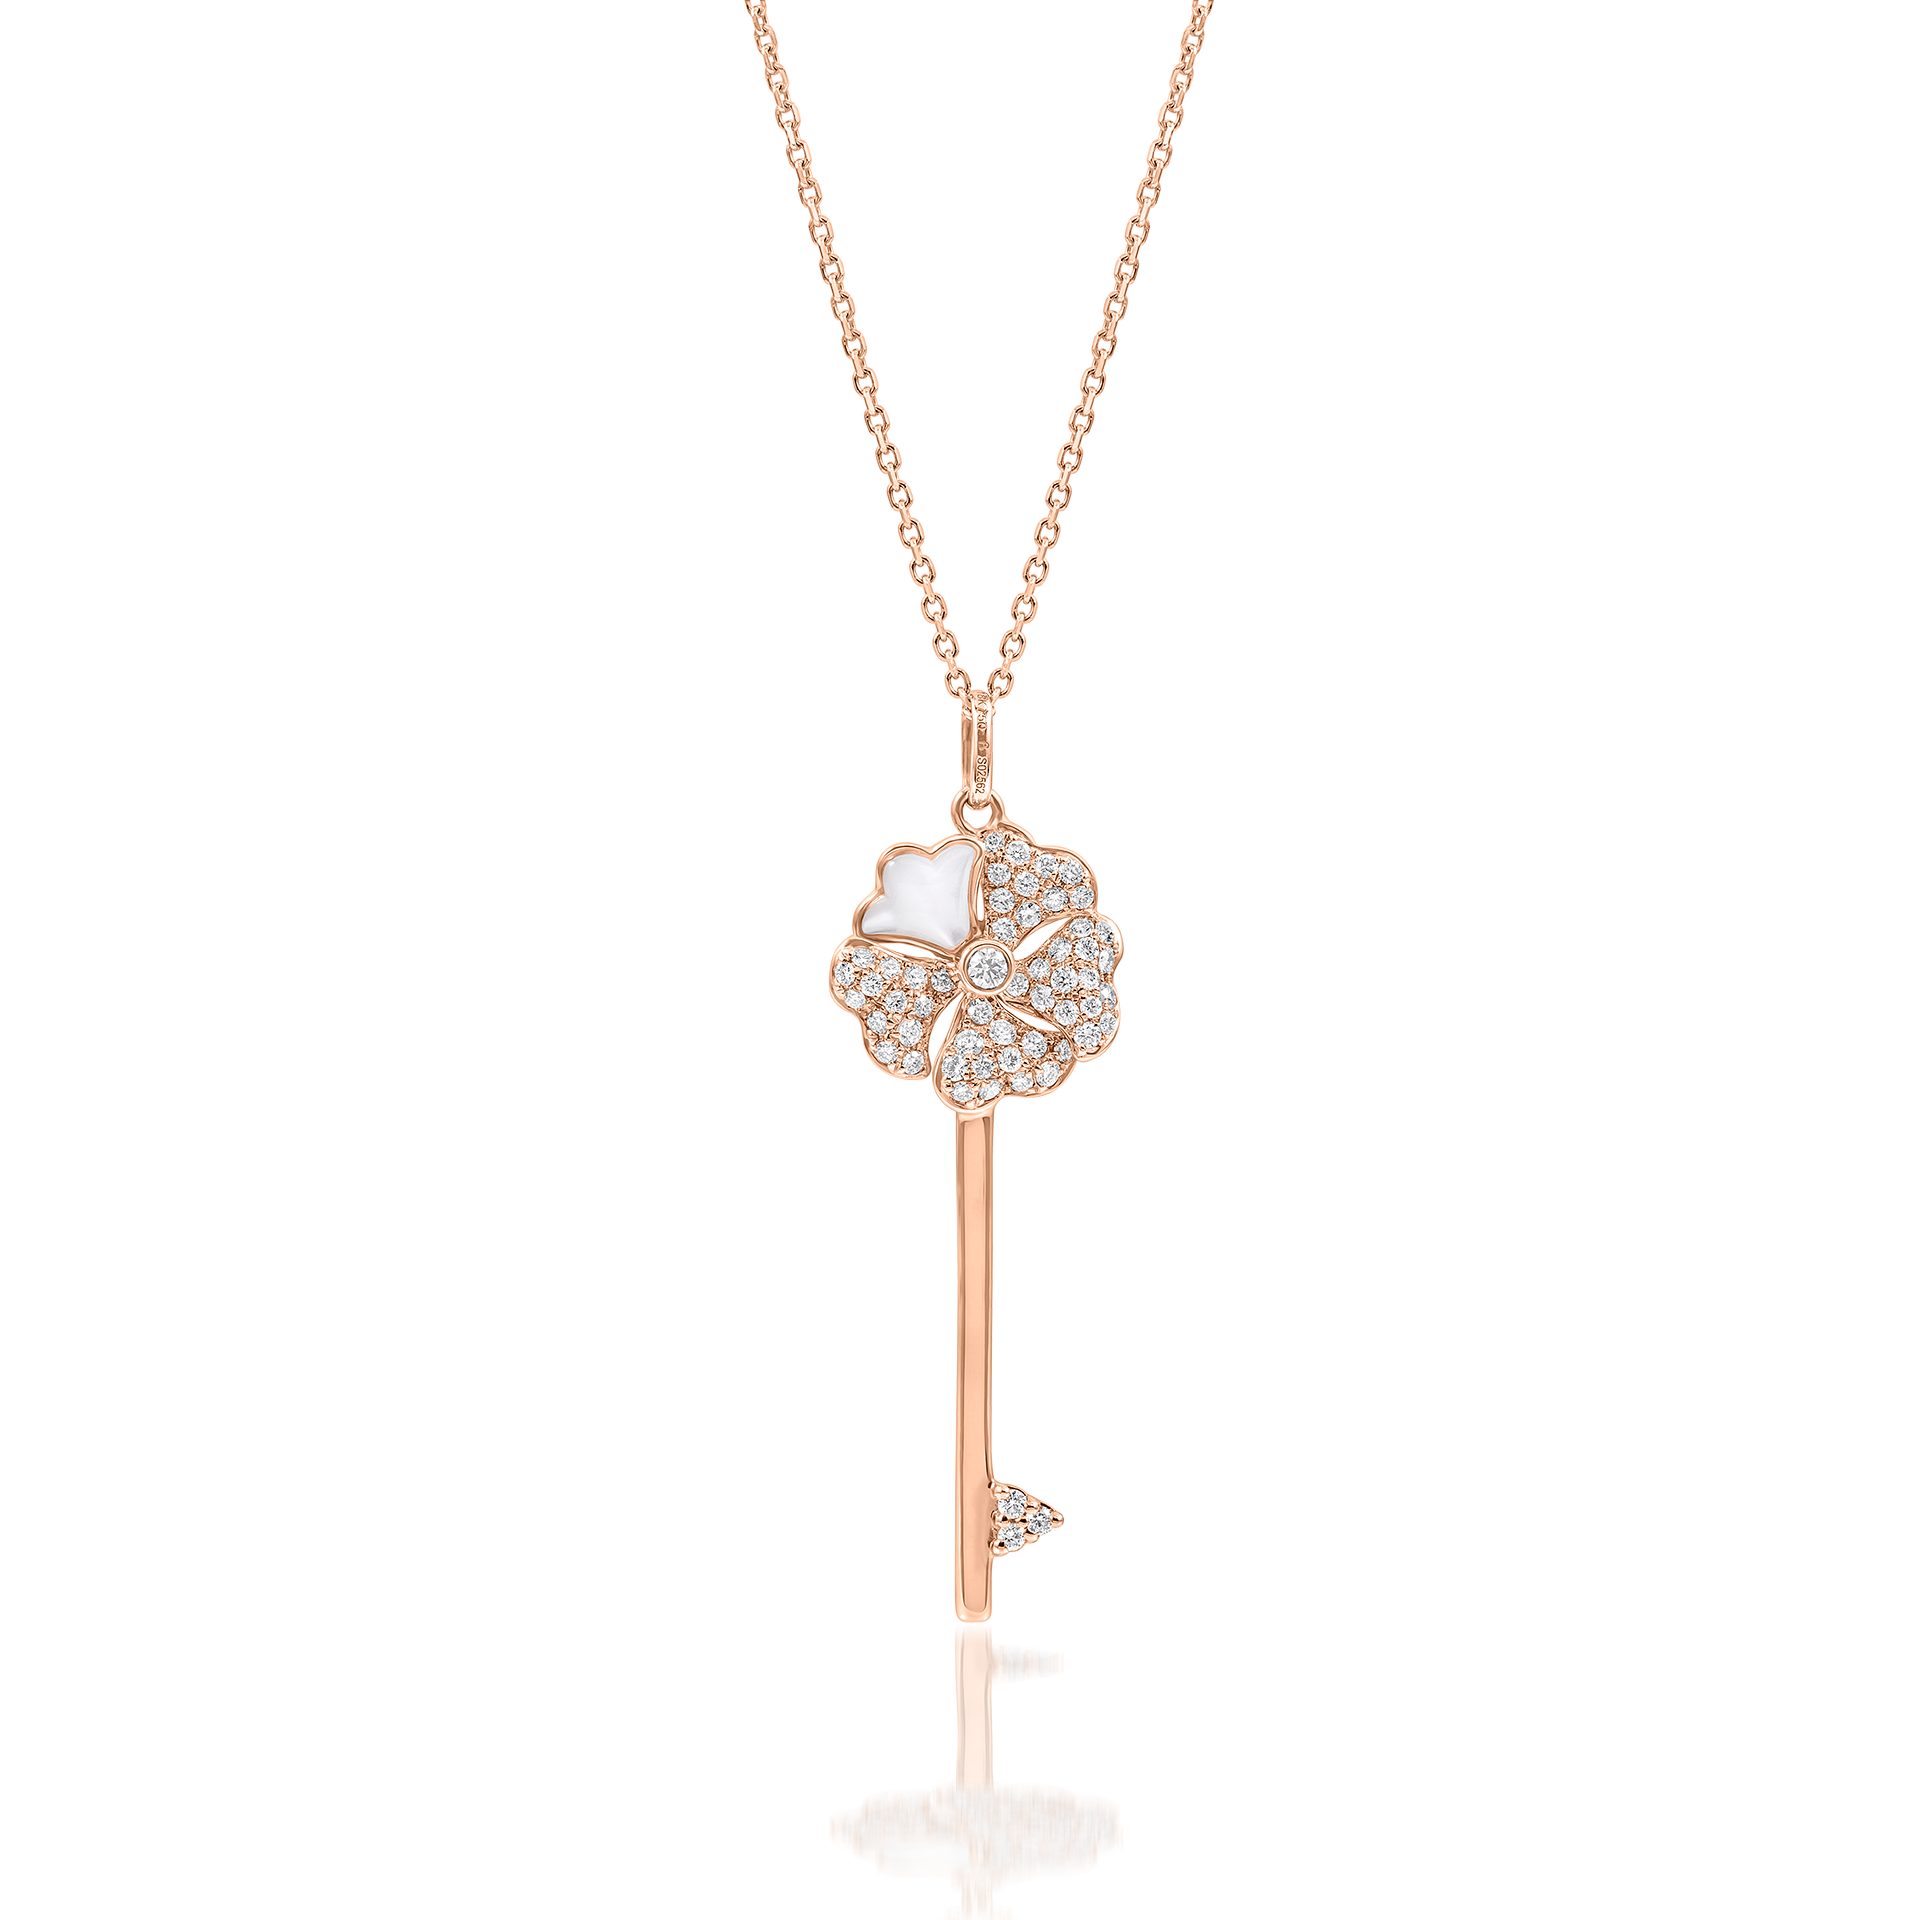 Bloom Diamond Key Necklace with Mother-of-Pearl In 18K Rose Gold